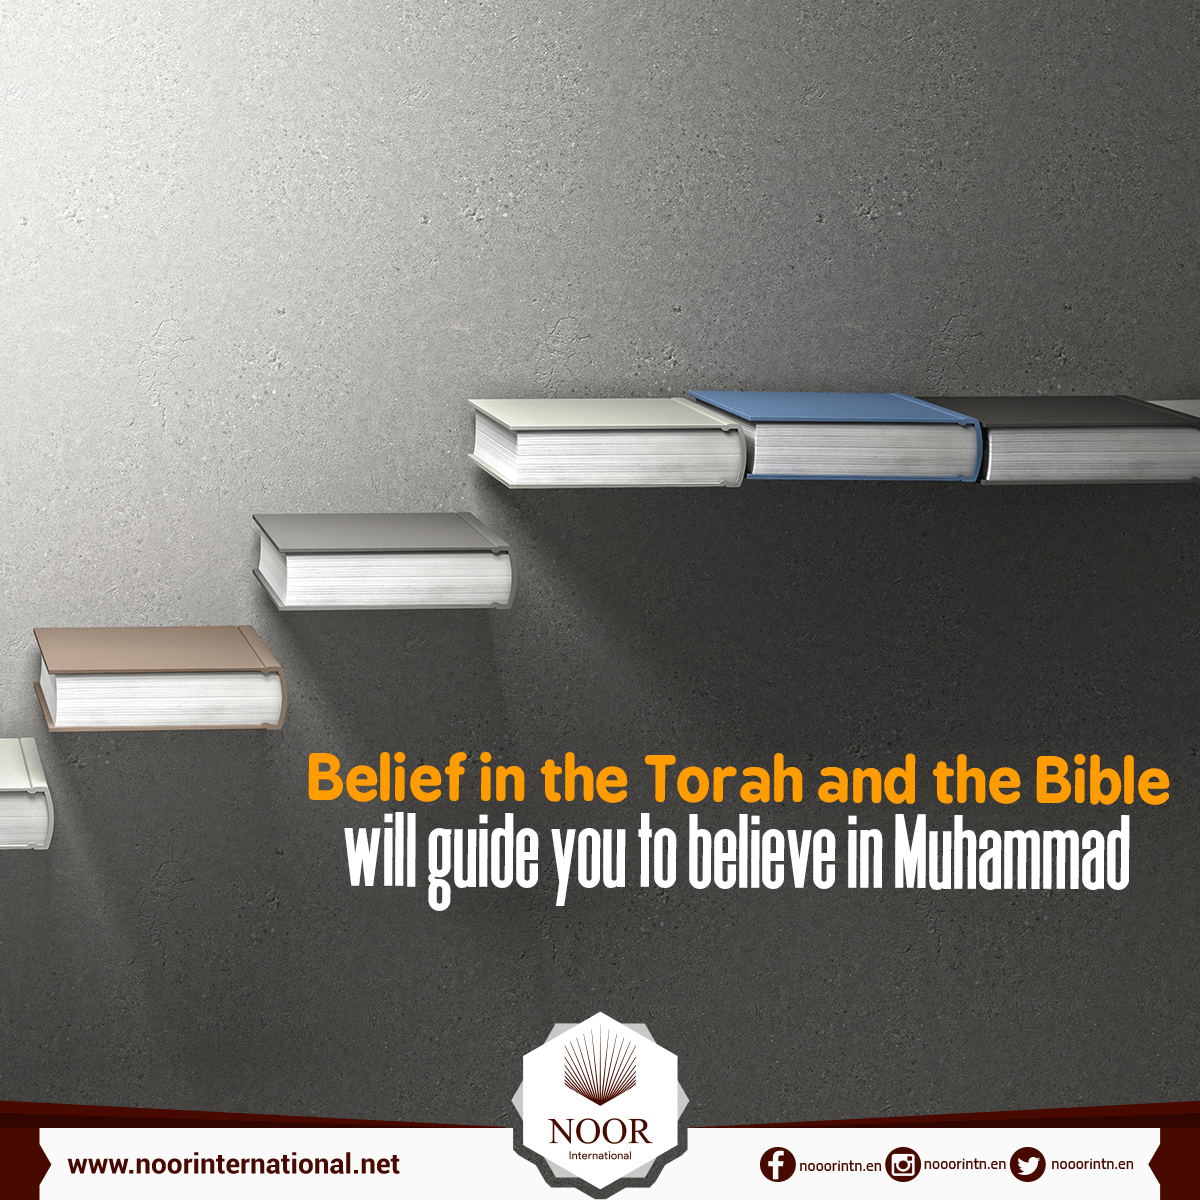 The Scientific Miracles of the Holy Quran